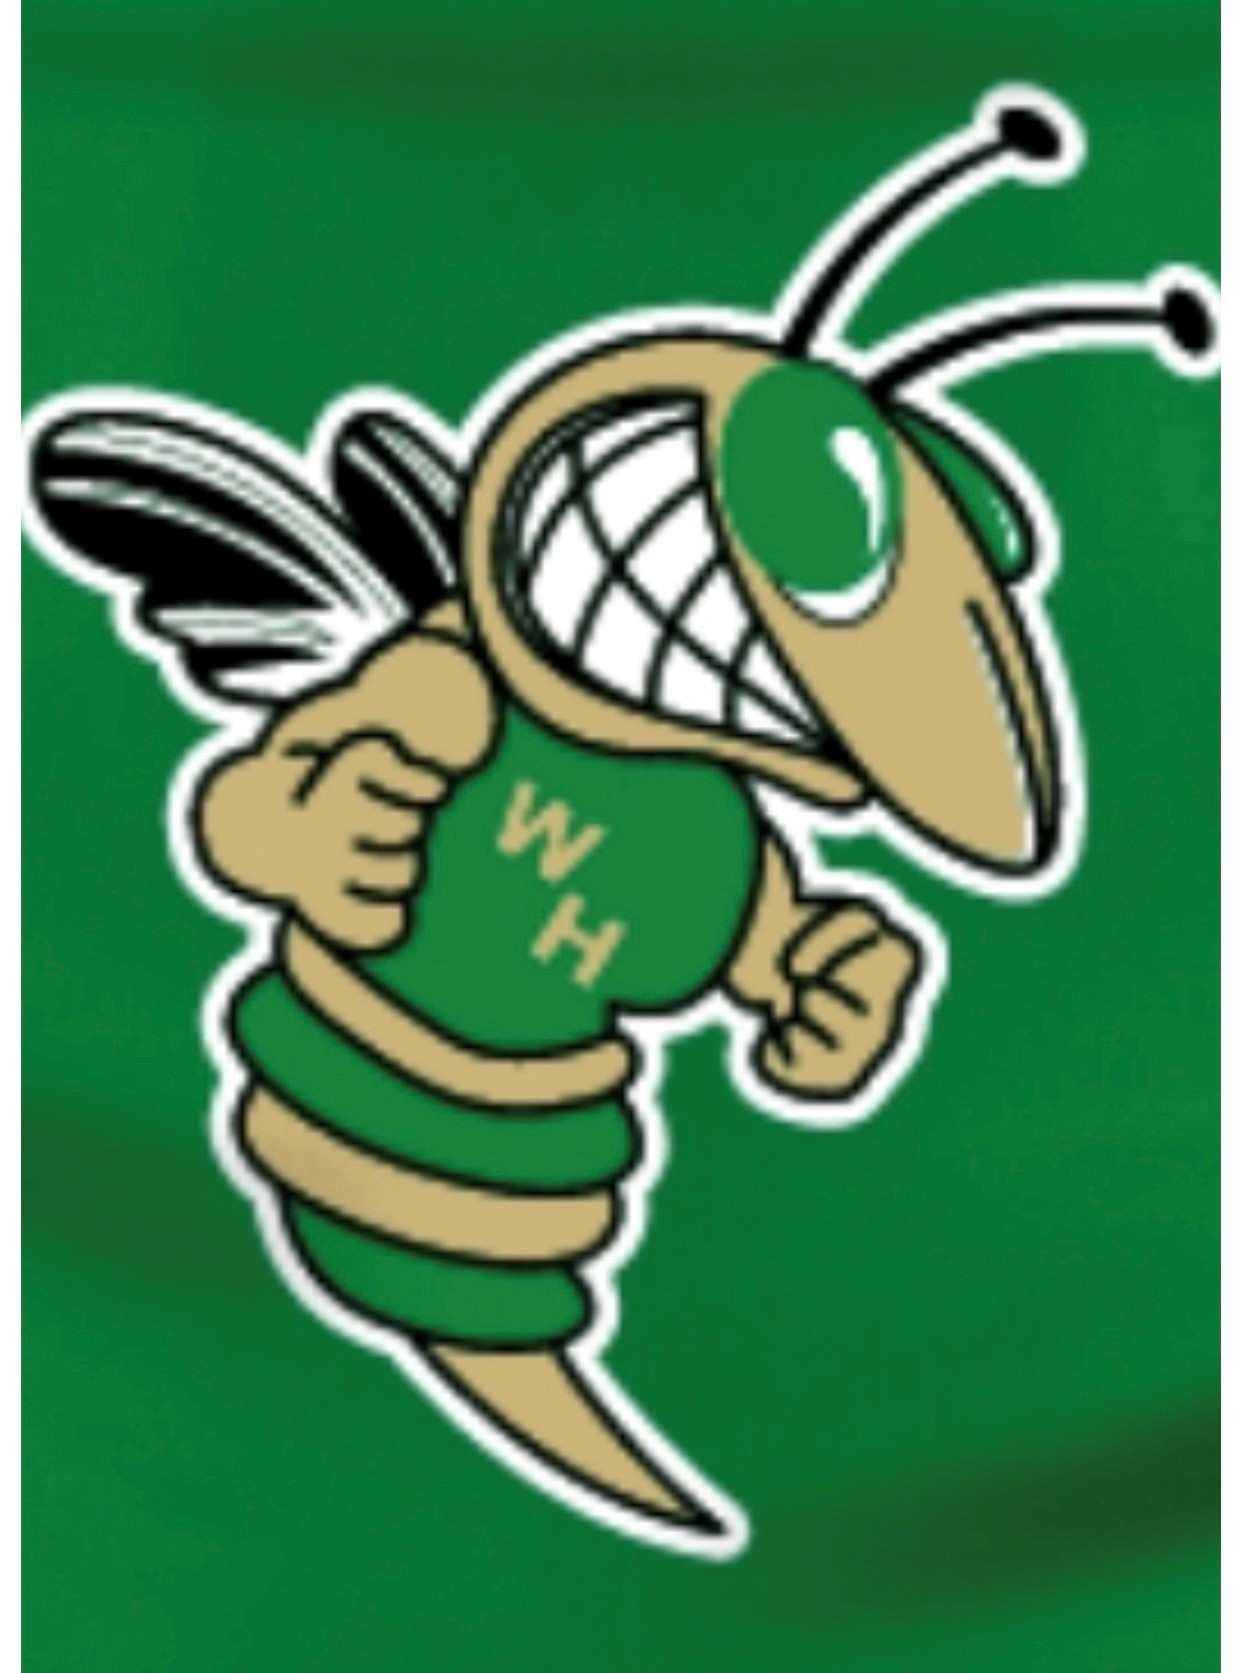 local-level-events-walnut-hill-hornets-middle-school-football-home